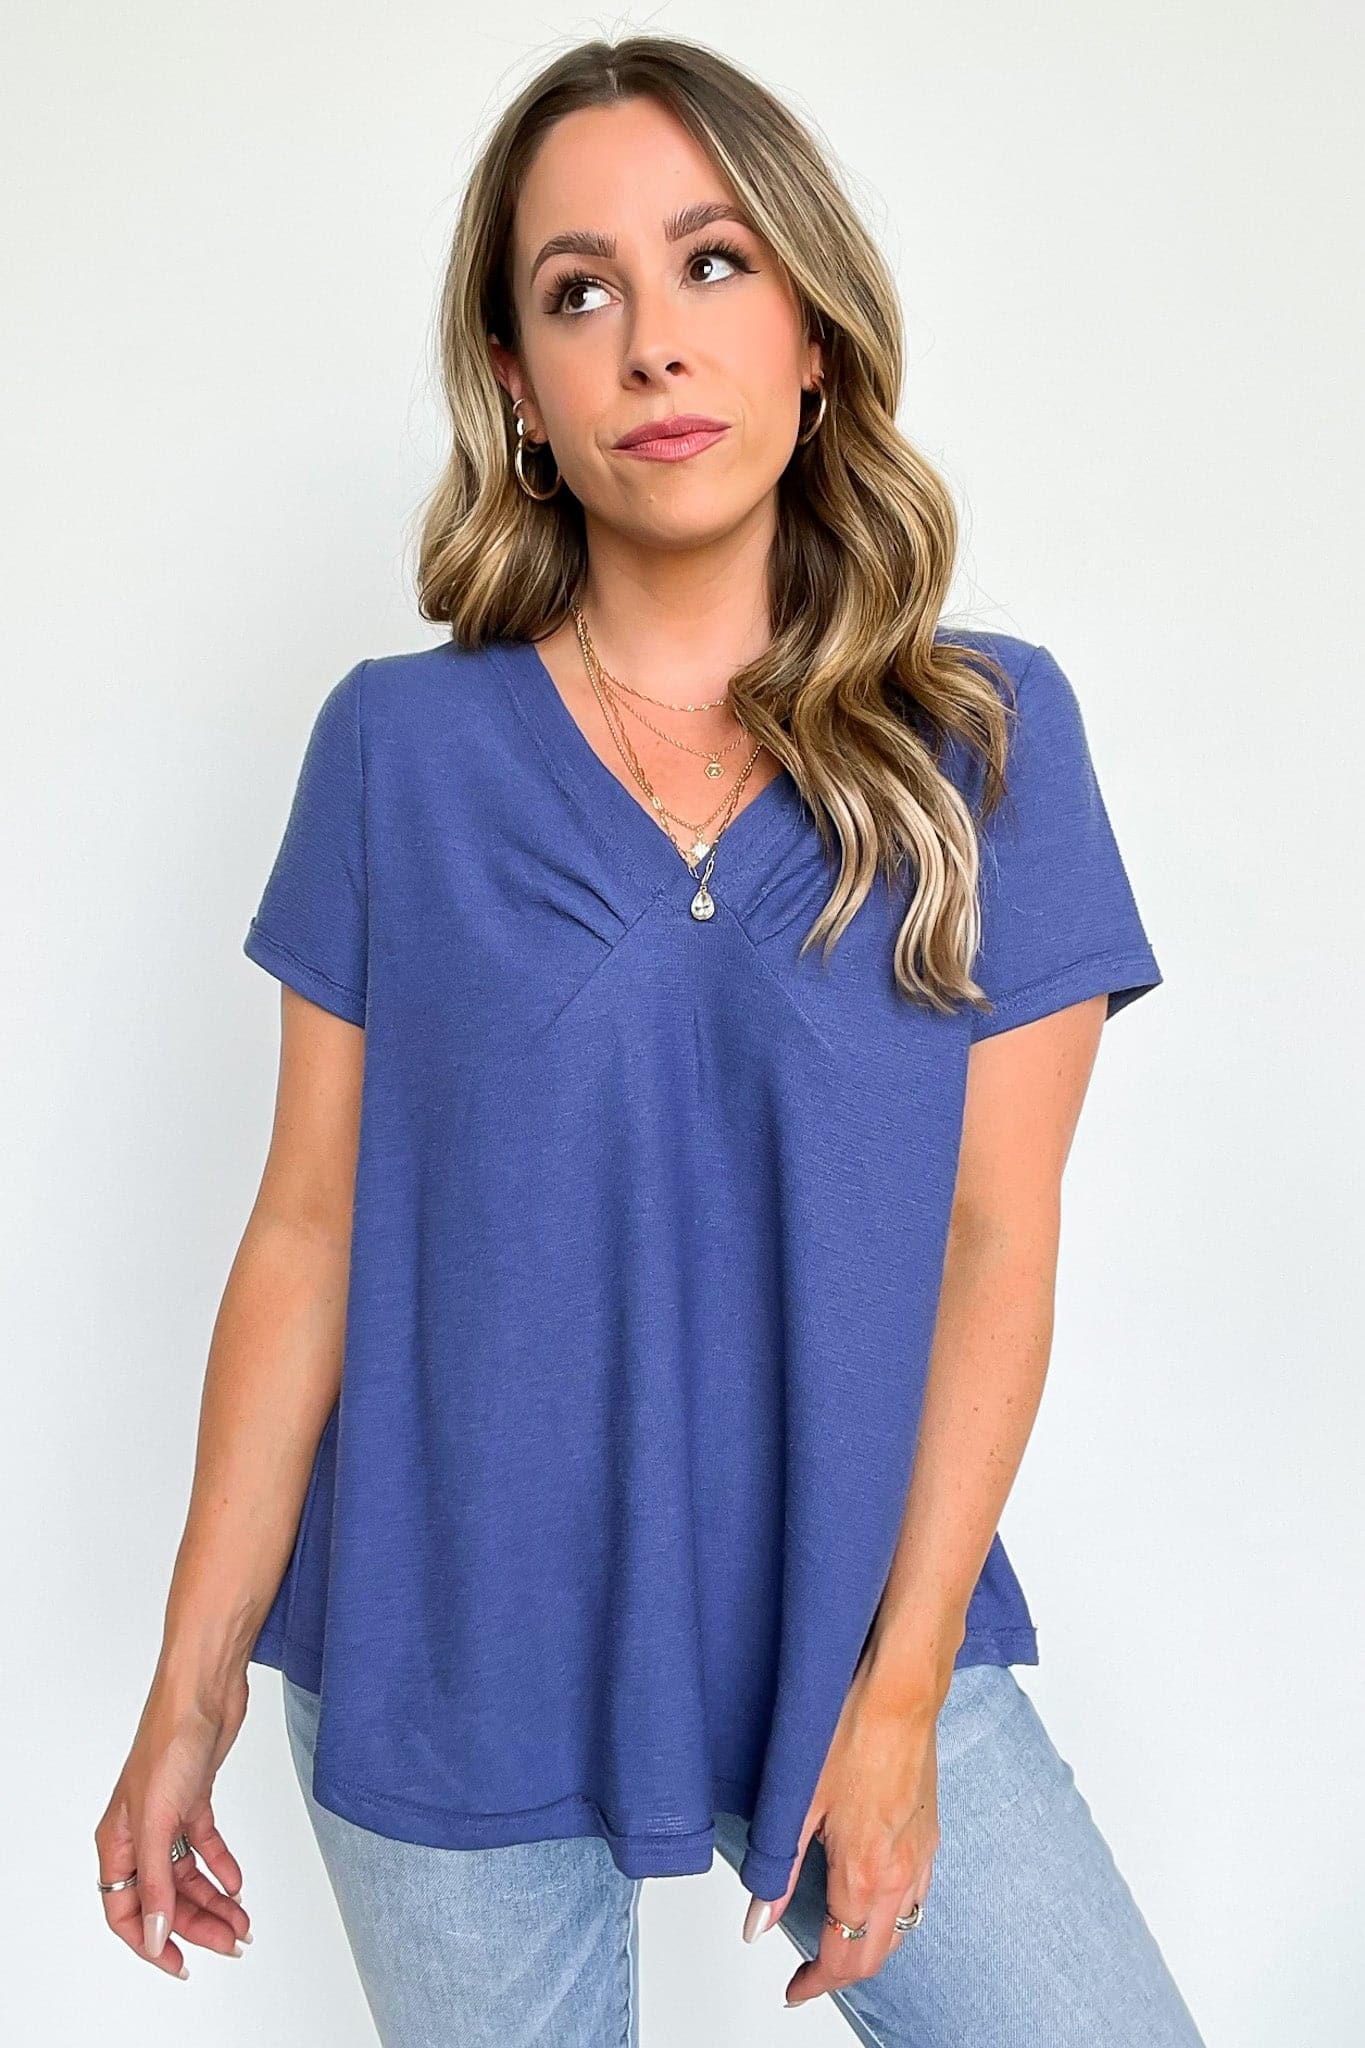 Denim / S Audrie Short Sleeve V-Neck Top - FINAL SALE - Madison and Mallory